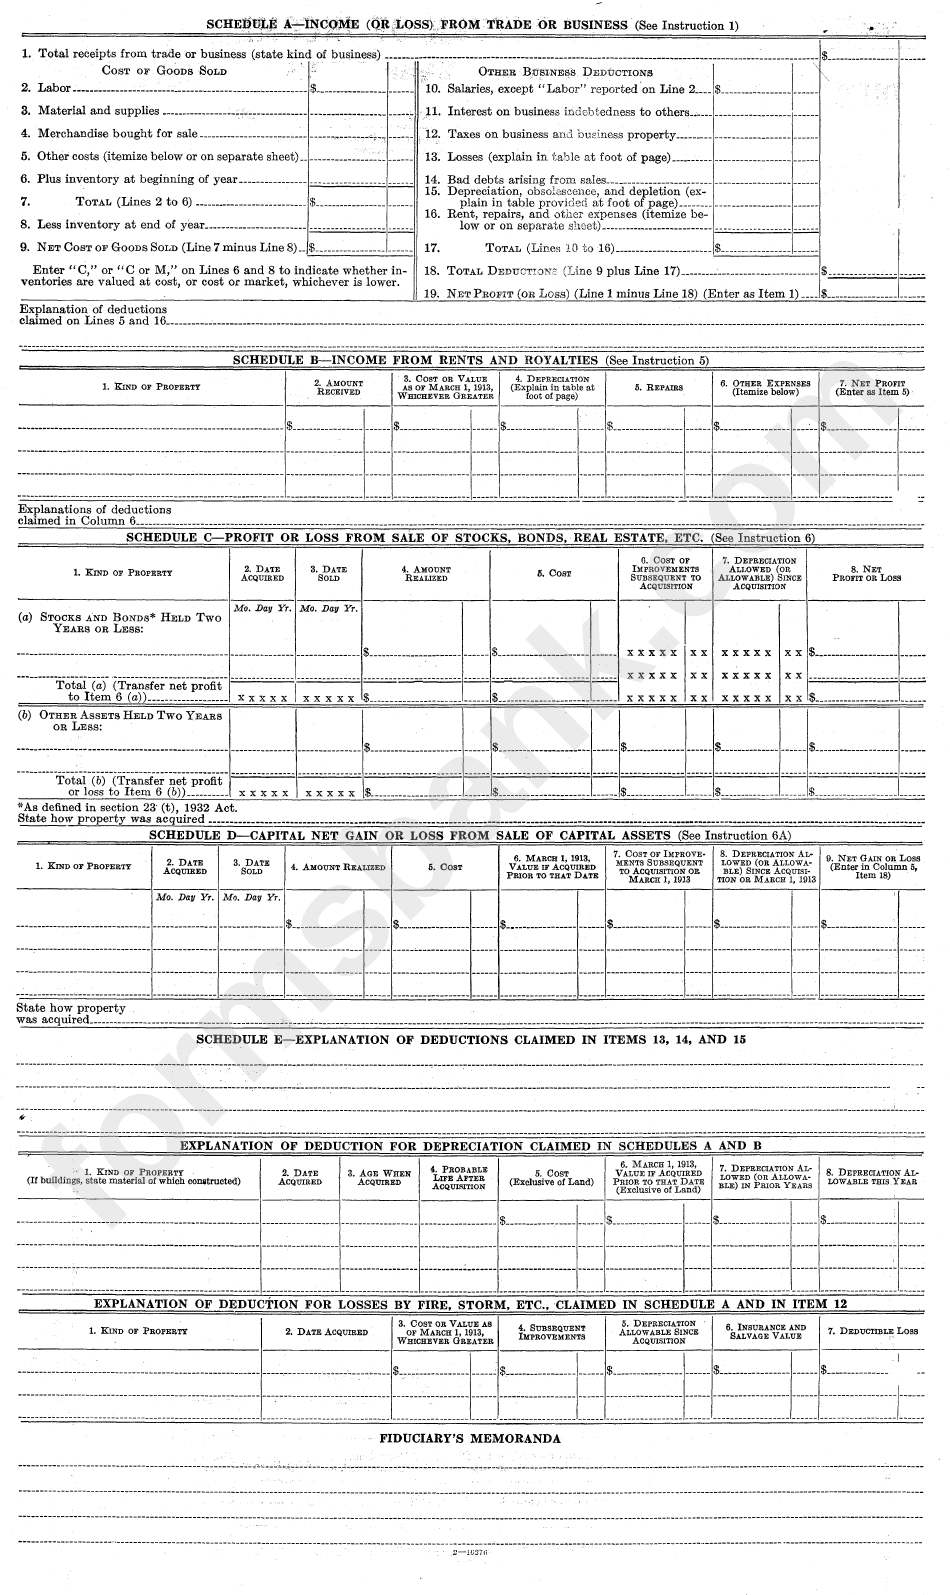 Form 1041 - Fiduciary Return Of Income For Calendar Year 1933 - U.s. Department Of Treasury